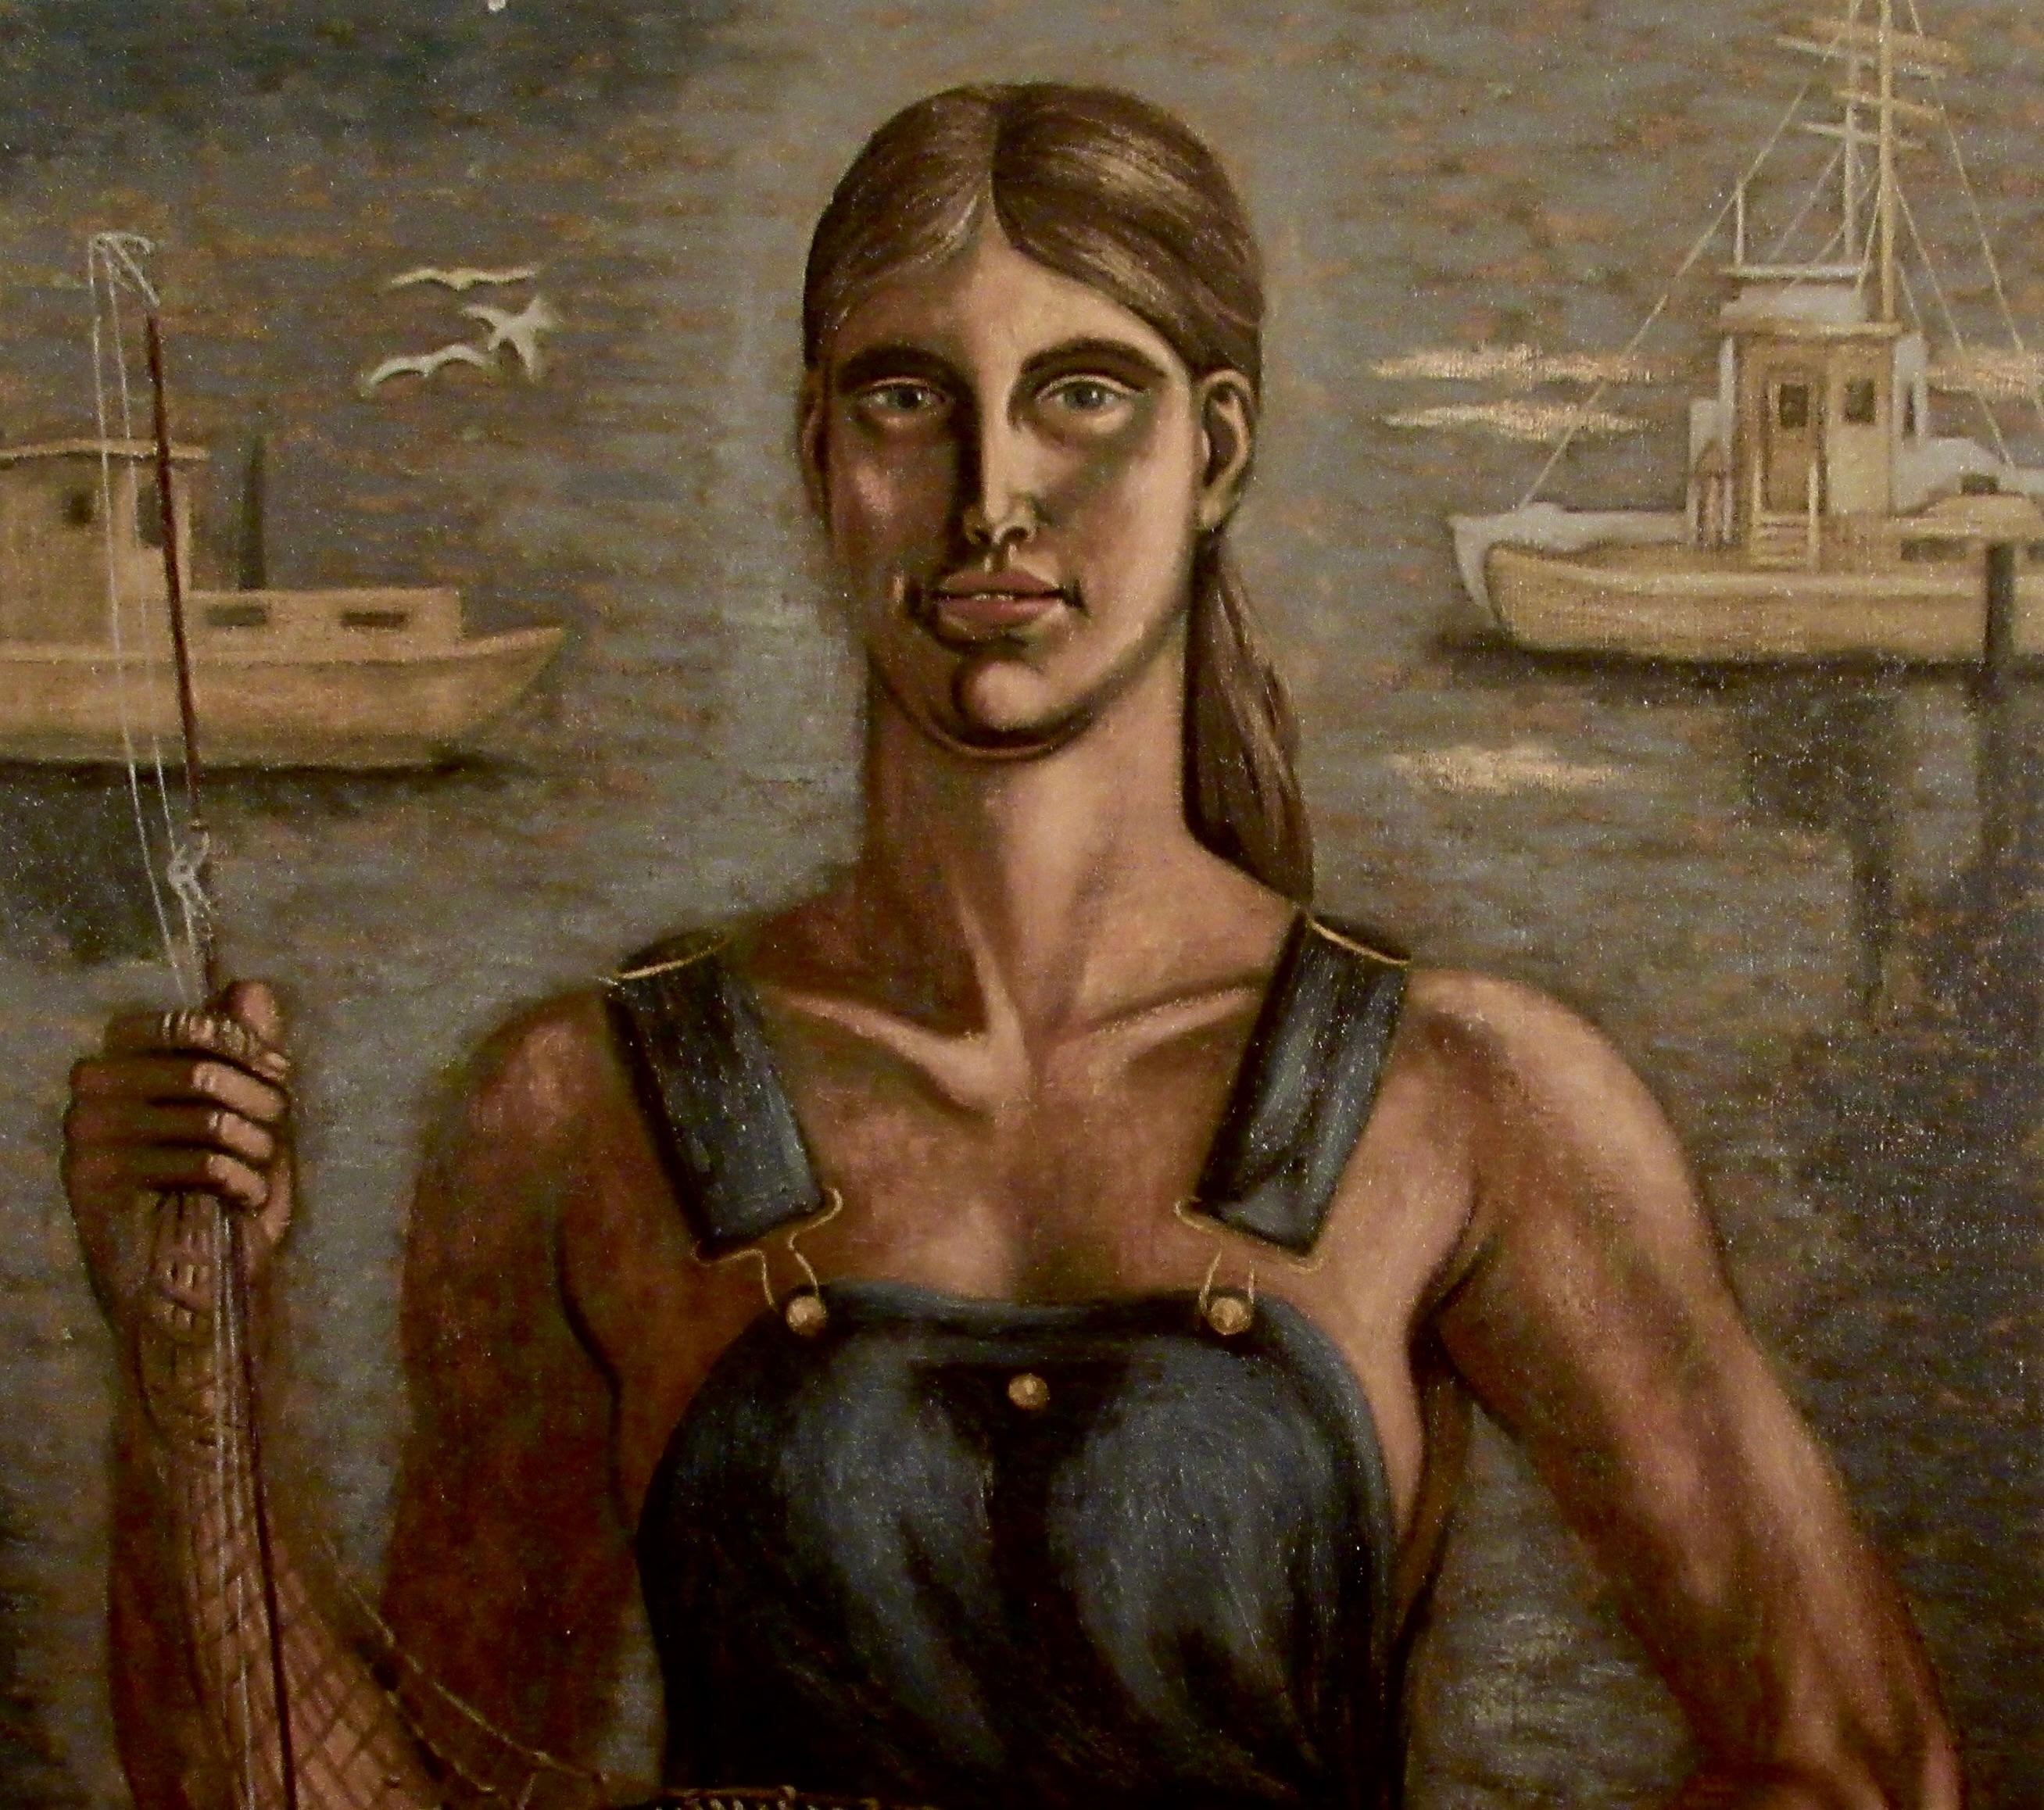 The Fisherwoman - Painting by Norbert Schlaus